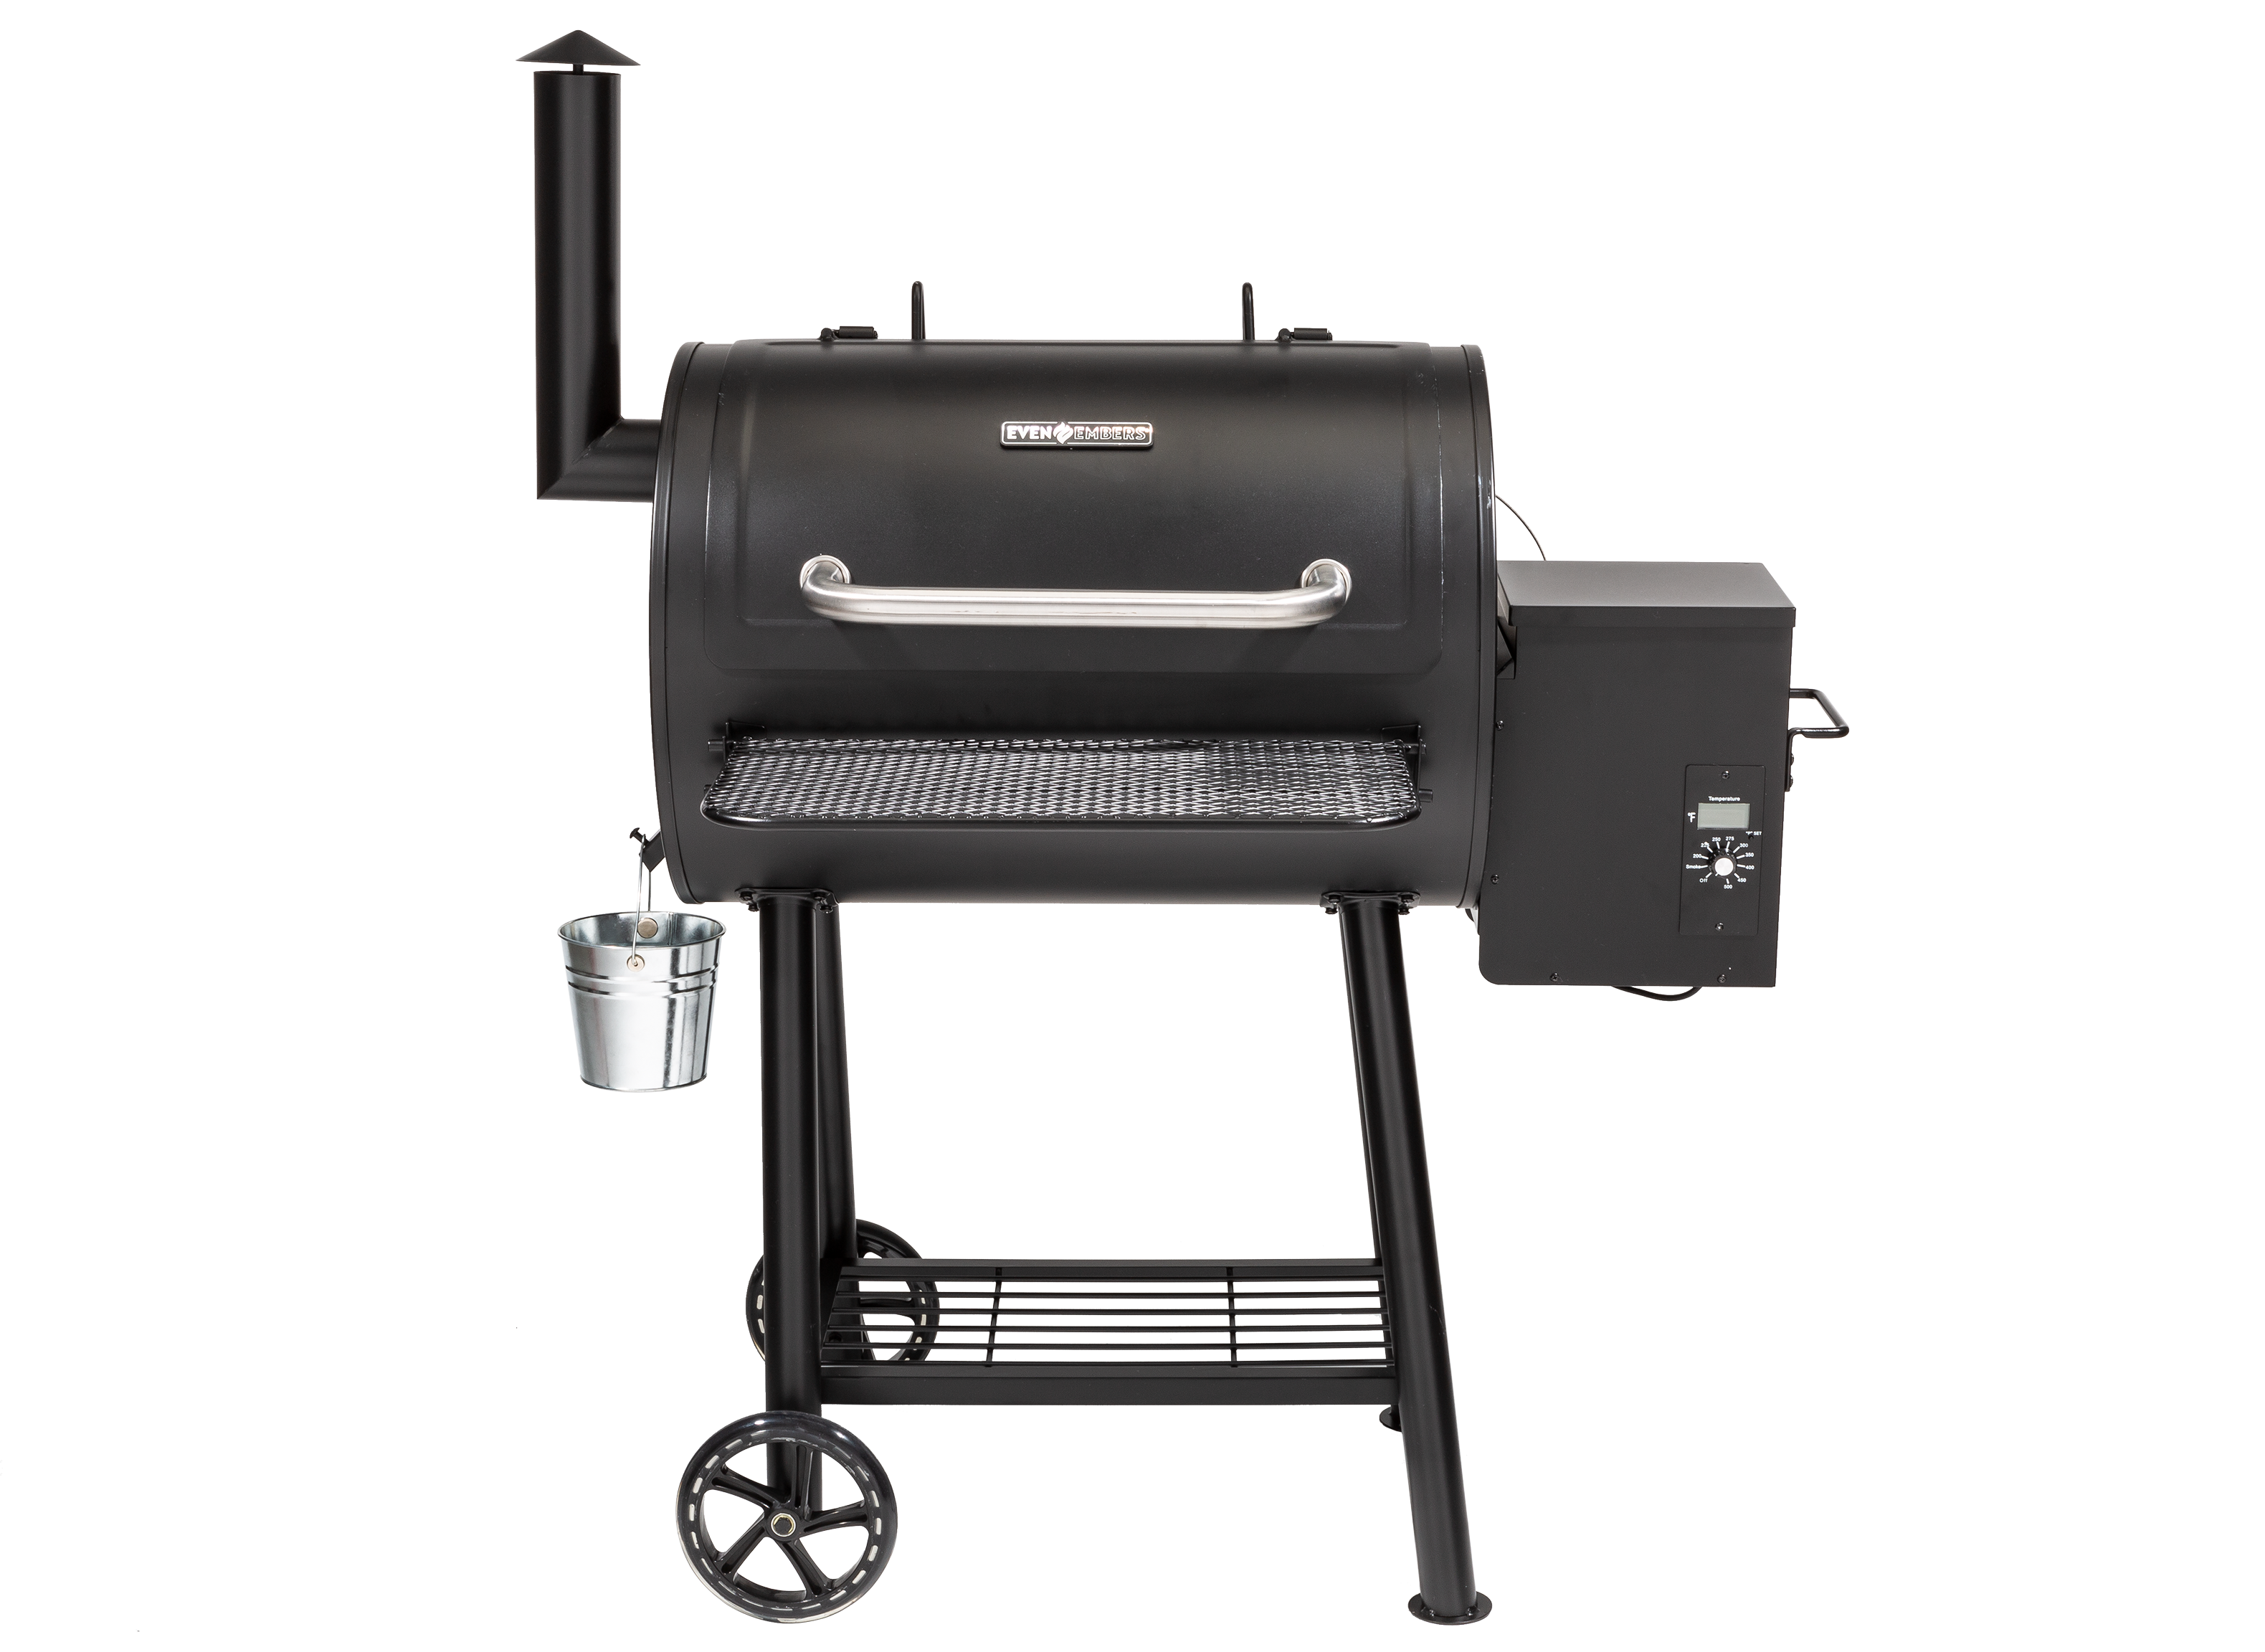 https://crdms.images.consumerreports.org/prod/products/cr/models/405679-pellet-grills-even-embers-smk2028as-10029280.png